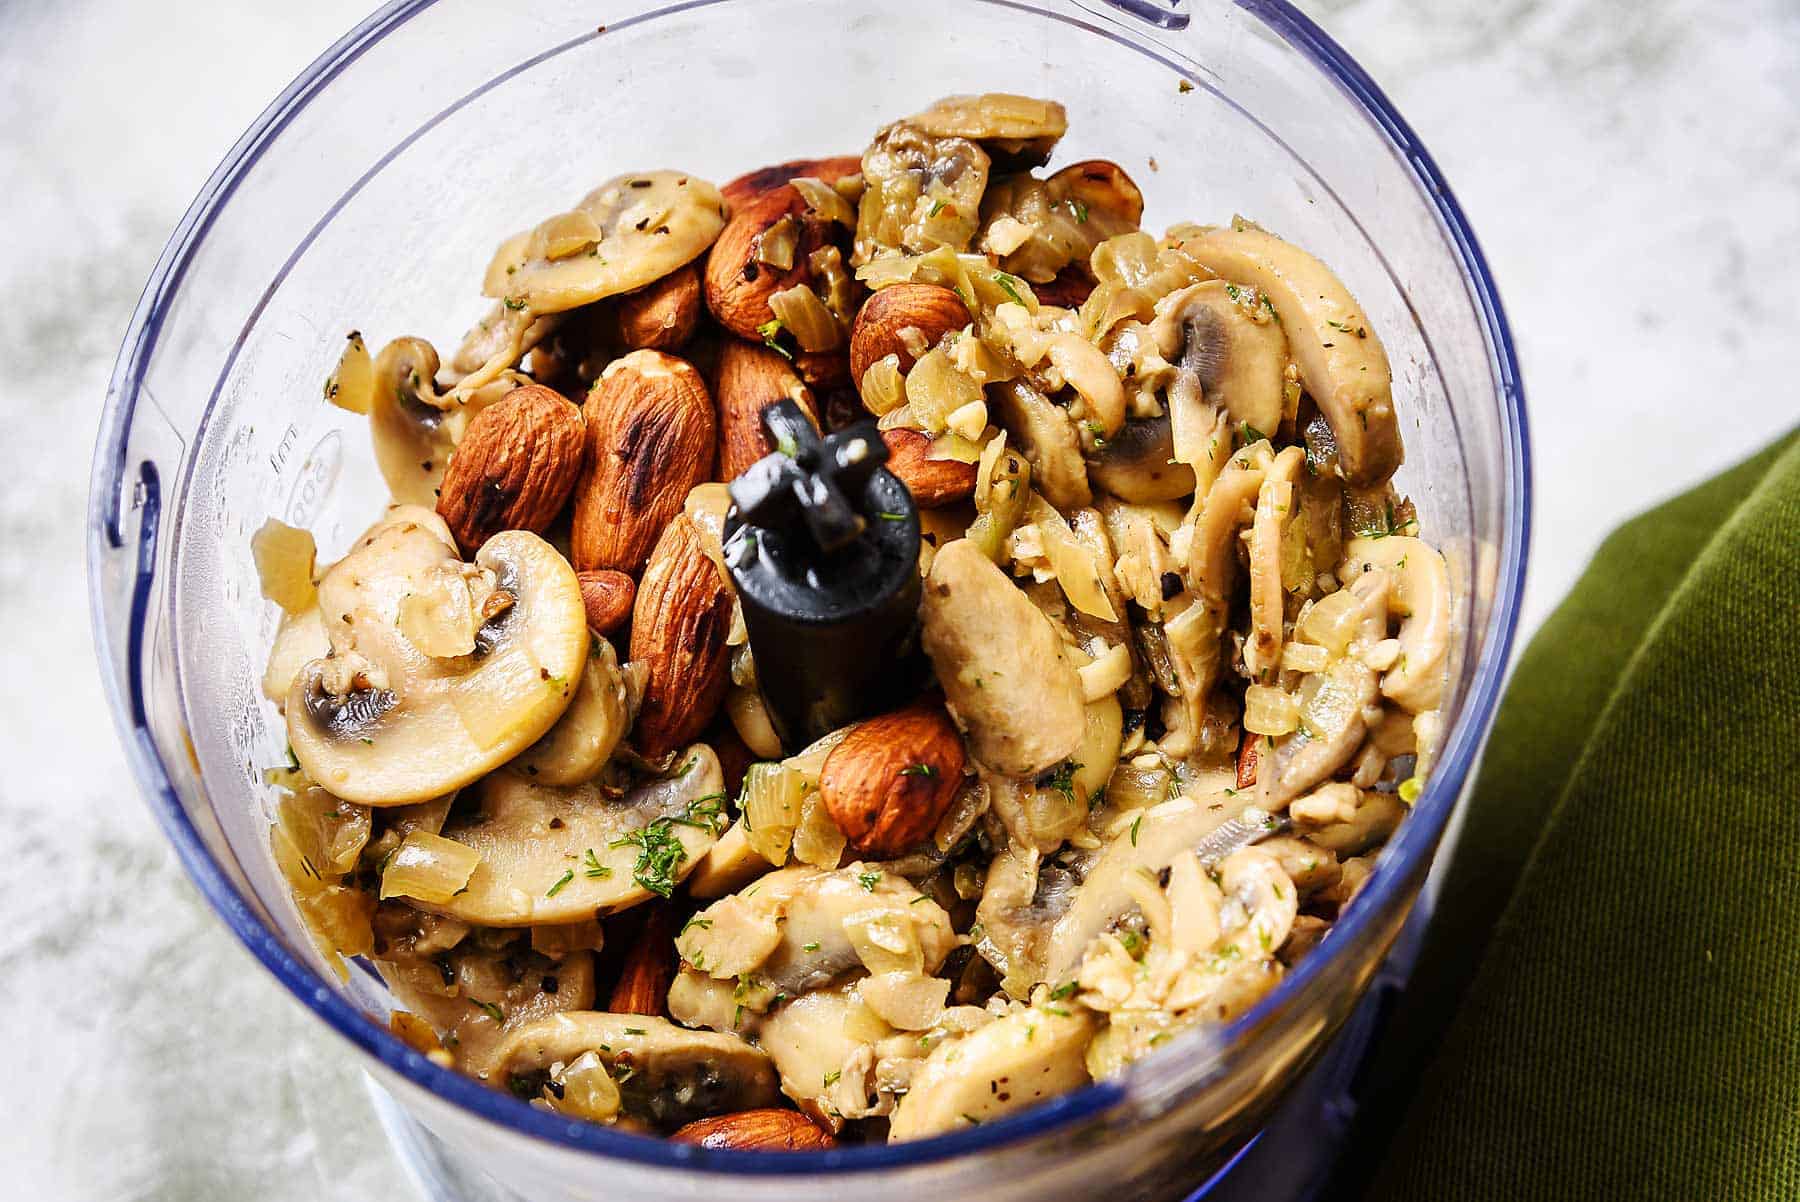 Cooked mushrooms and almonds in a blender